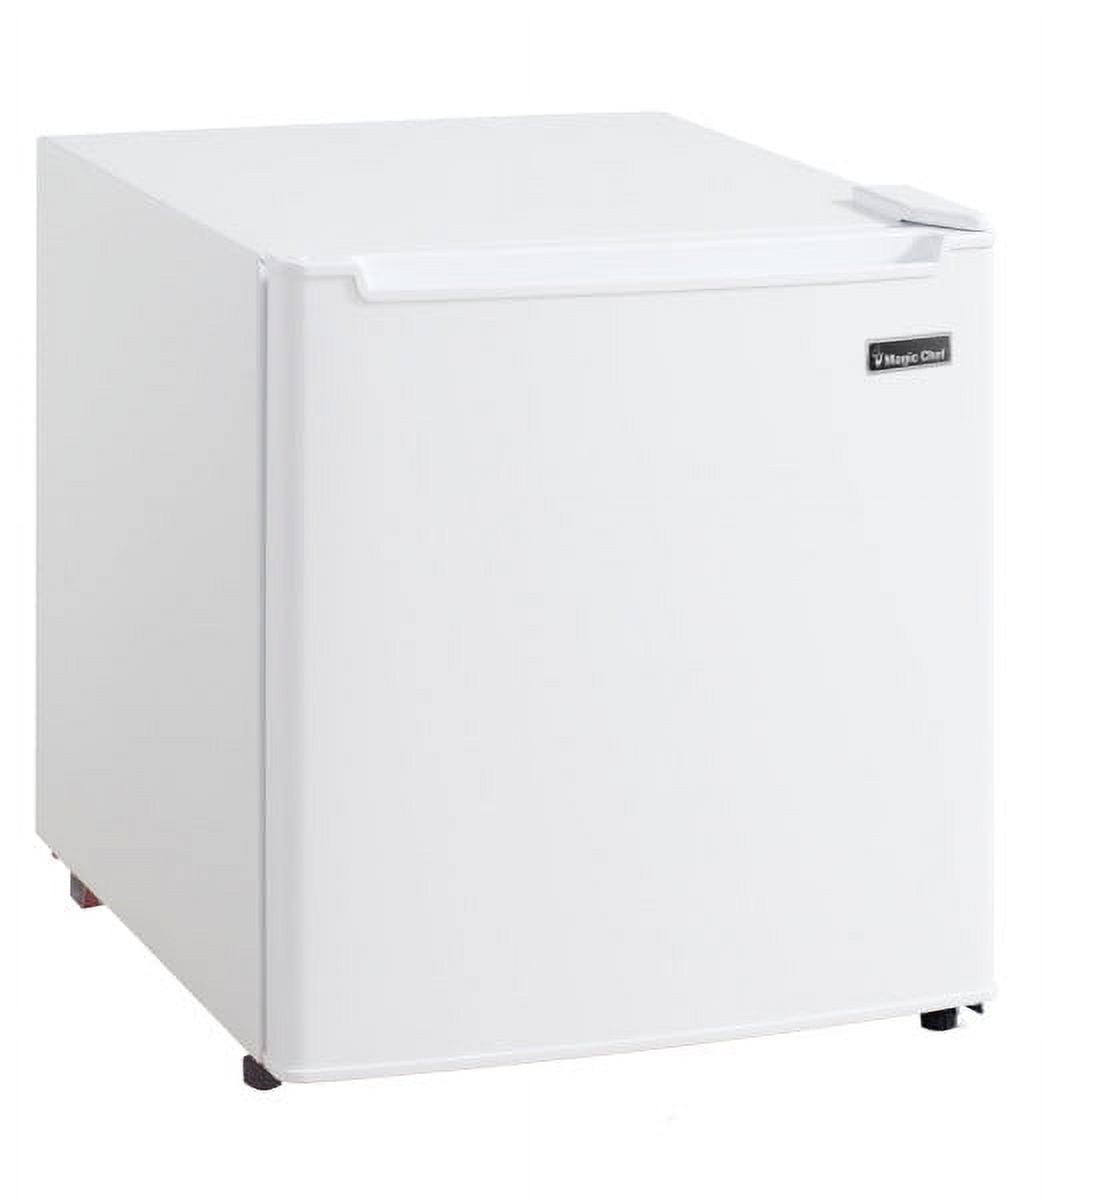 Mcr170we 1.7 Cu. Ft. Mini Refrigerator With Chiller Compartment - White